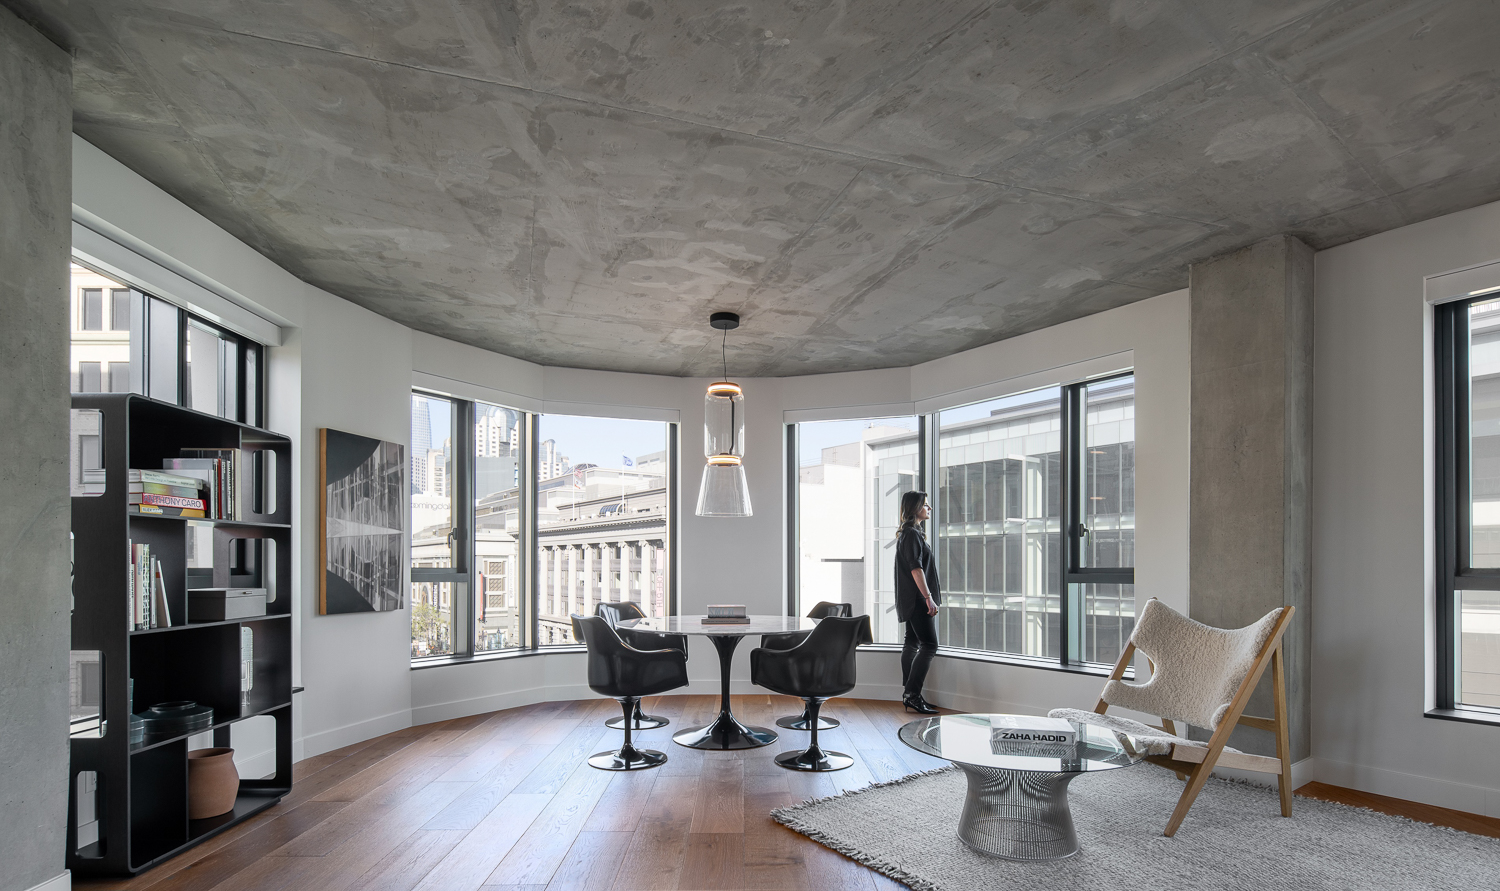 Serif SF living room with architectural concrete ceilings, image courtesy Serif